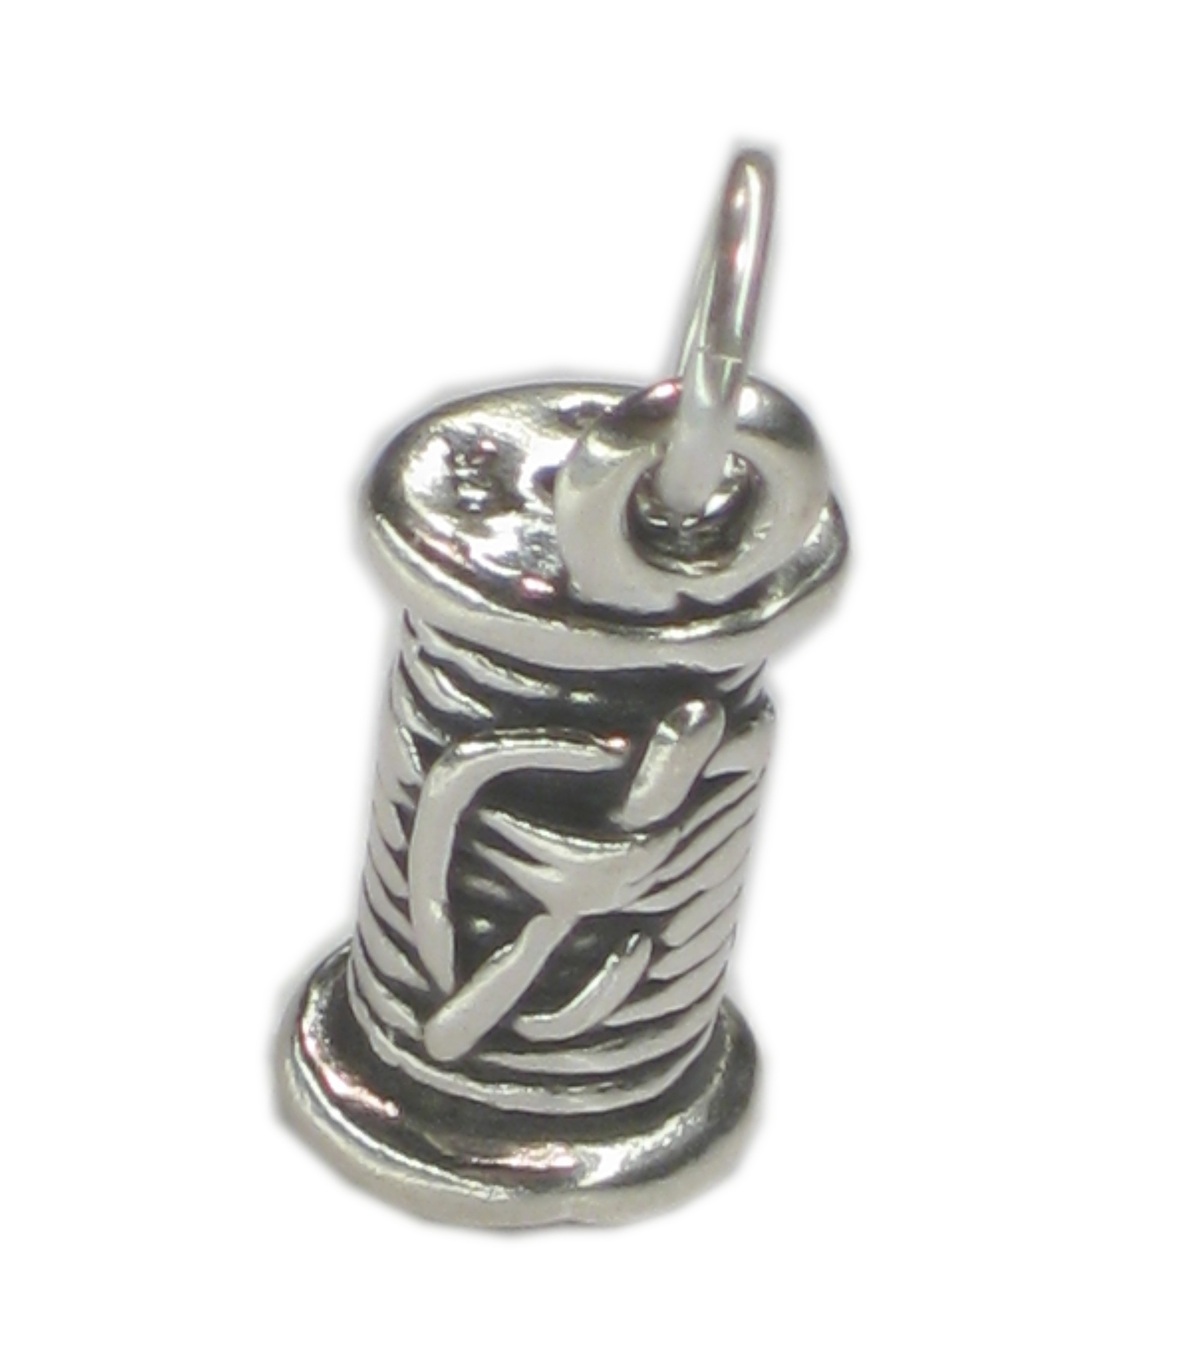 Cotton Reel sterling silver charm .925 x 1 Spool of thread charms